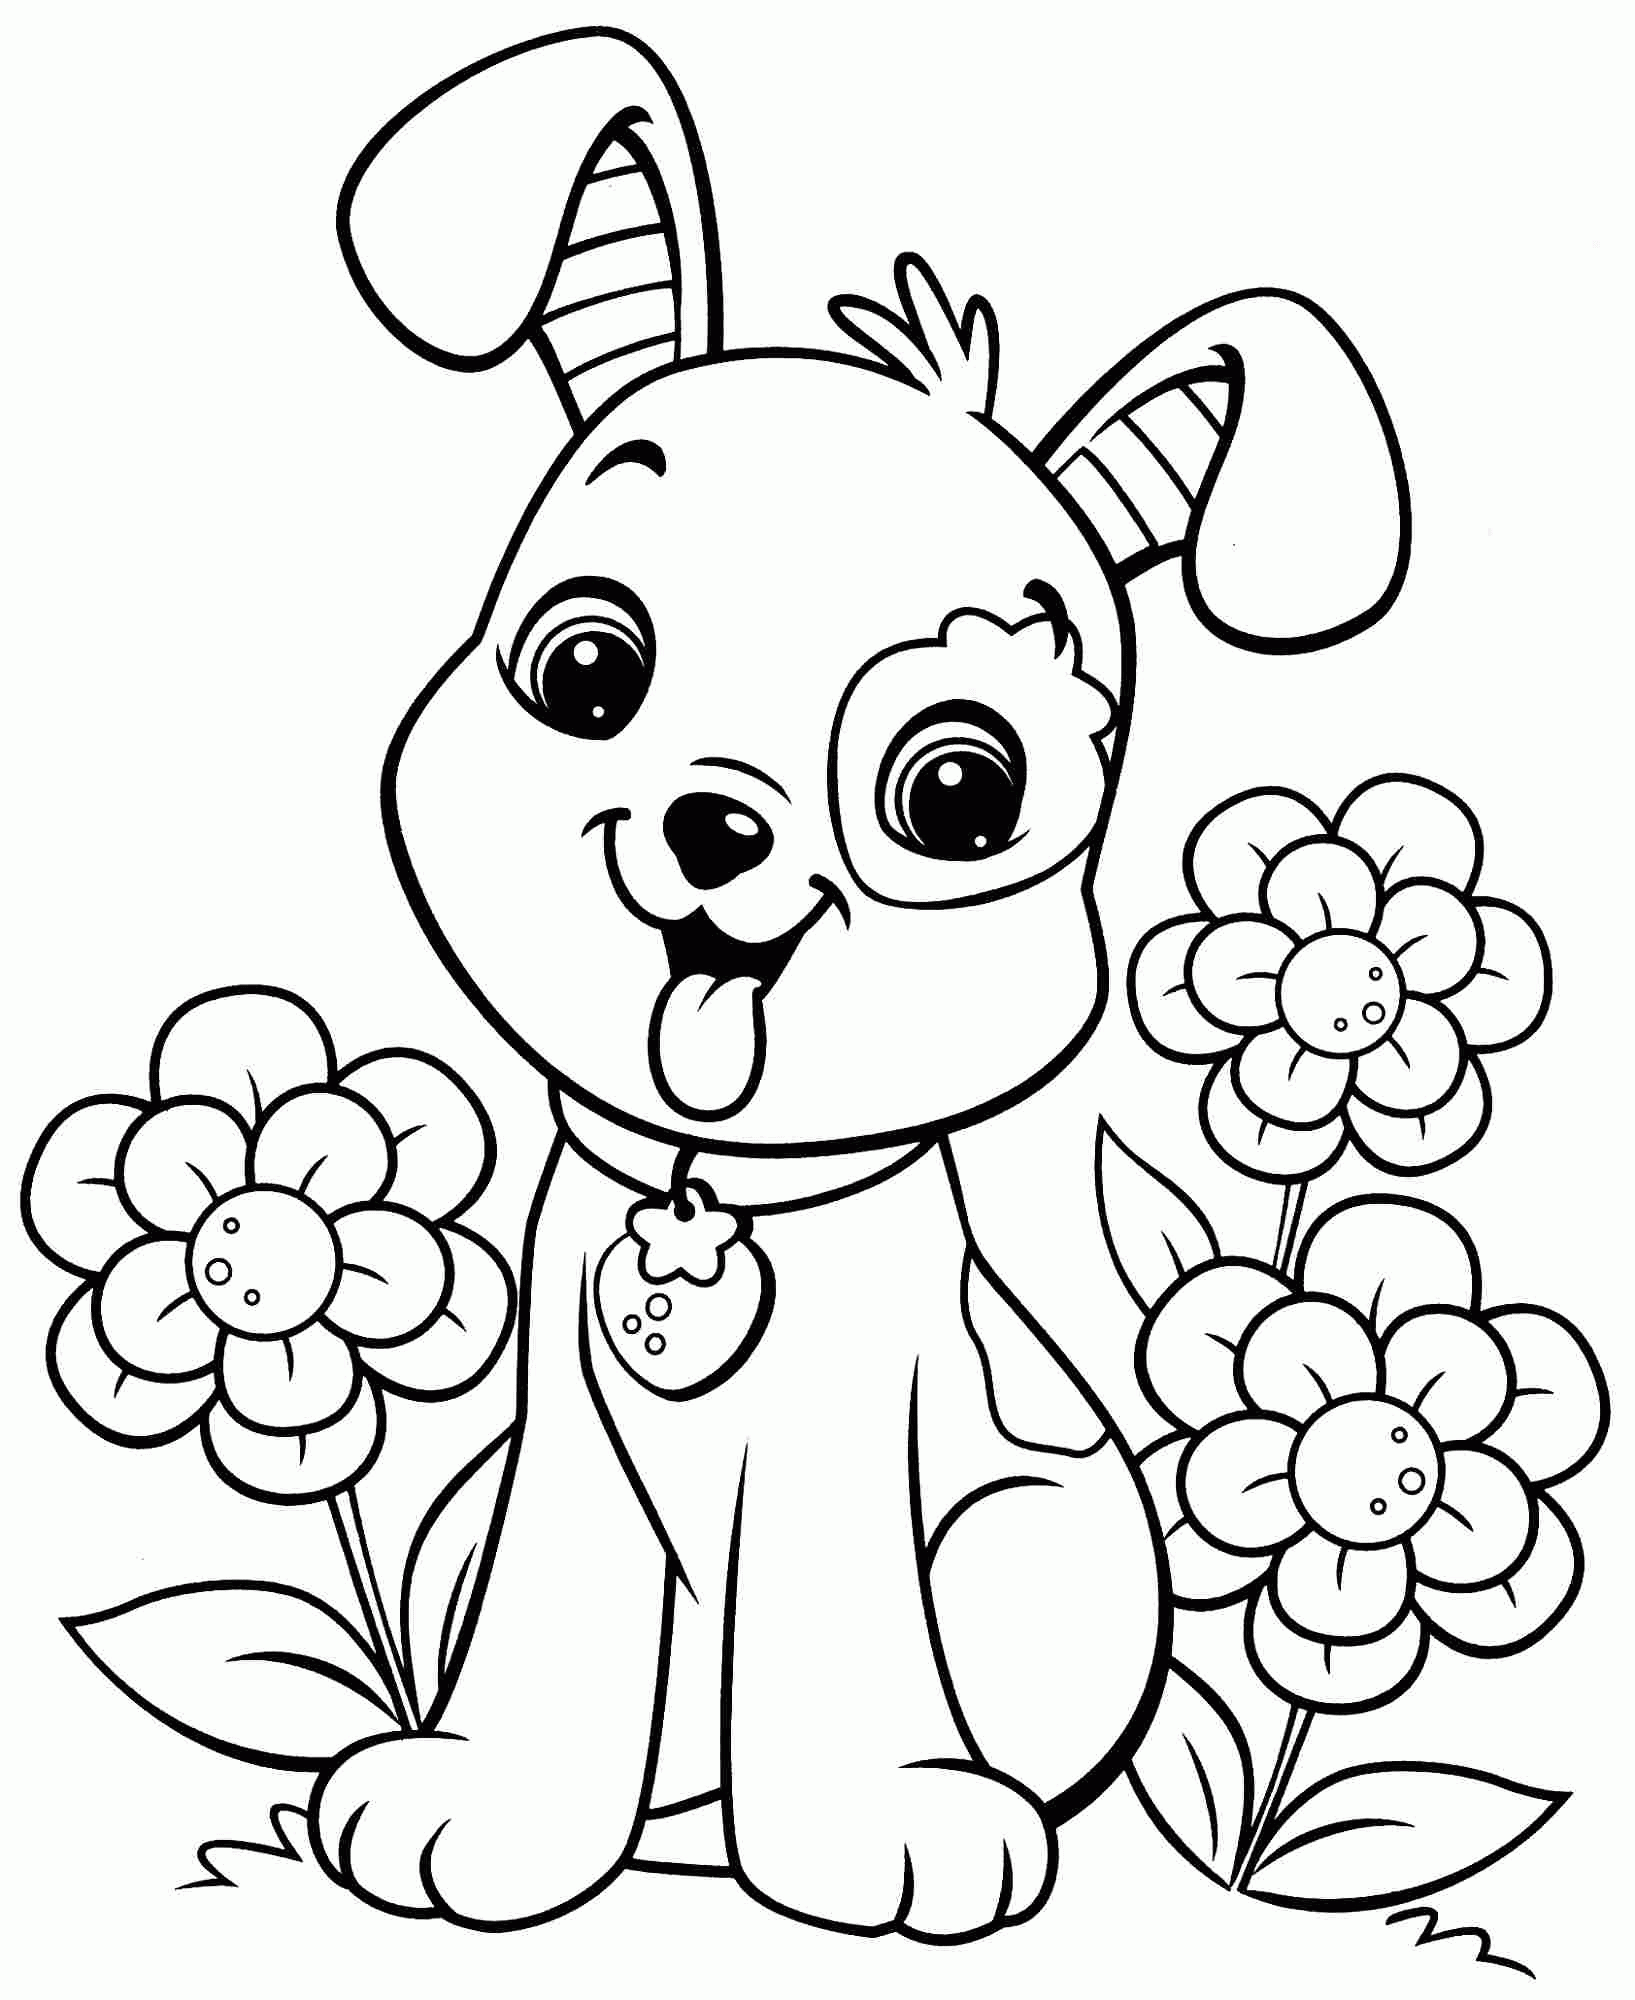 Printable Colouring Pages Animals